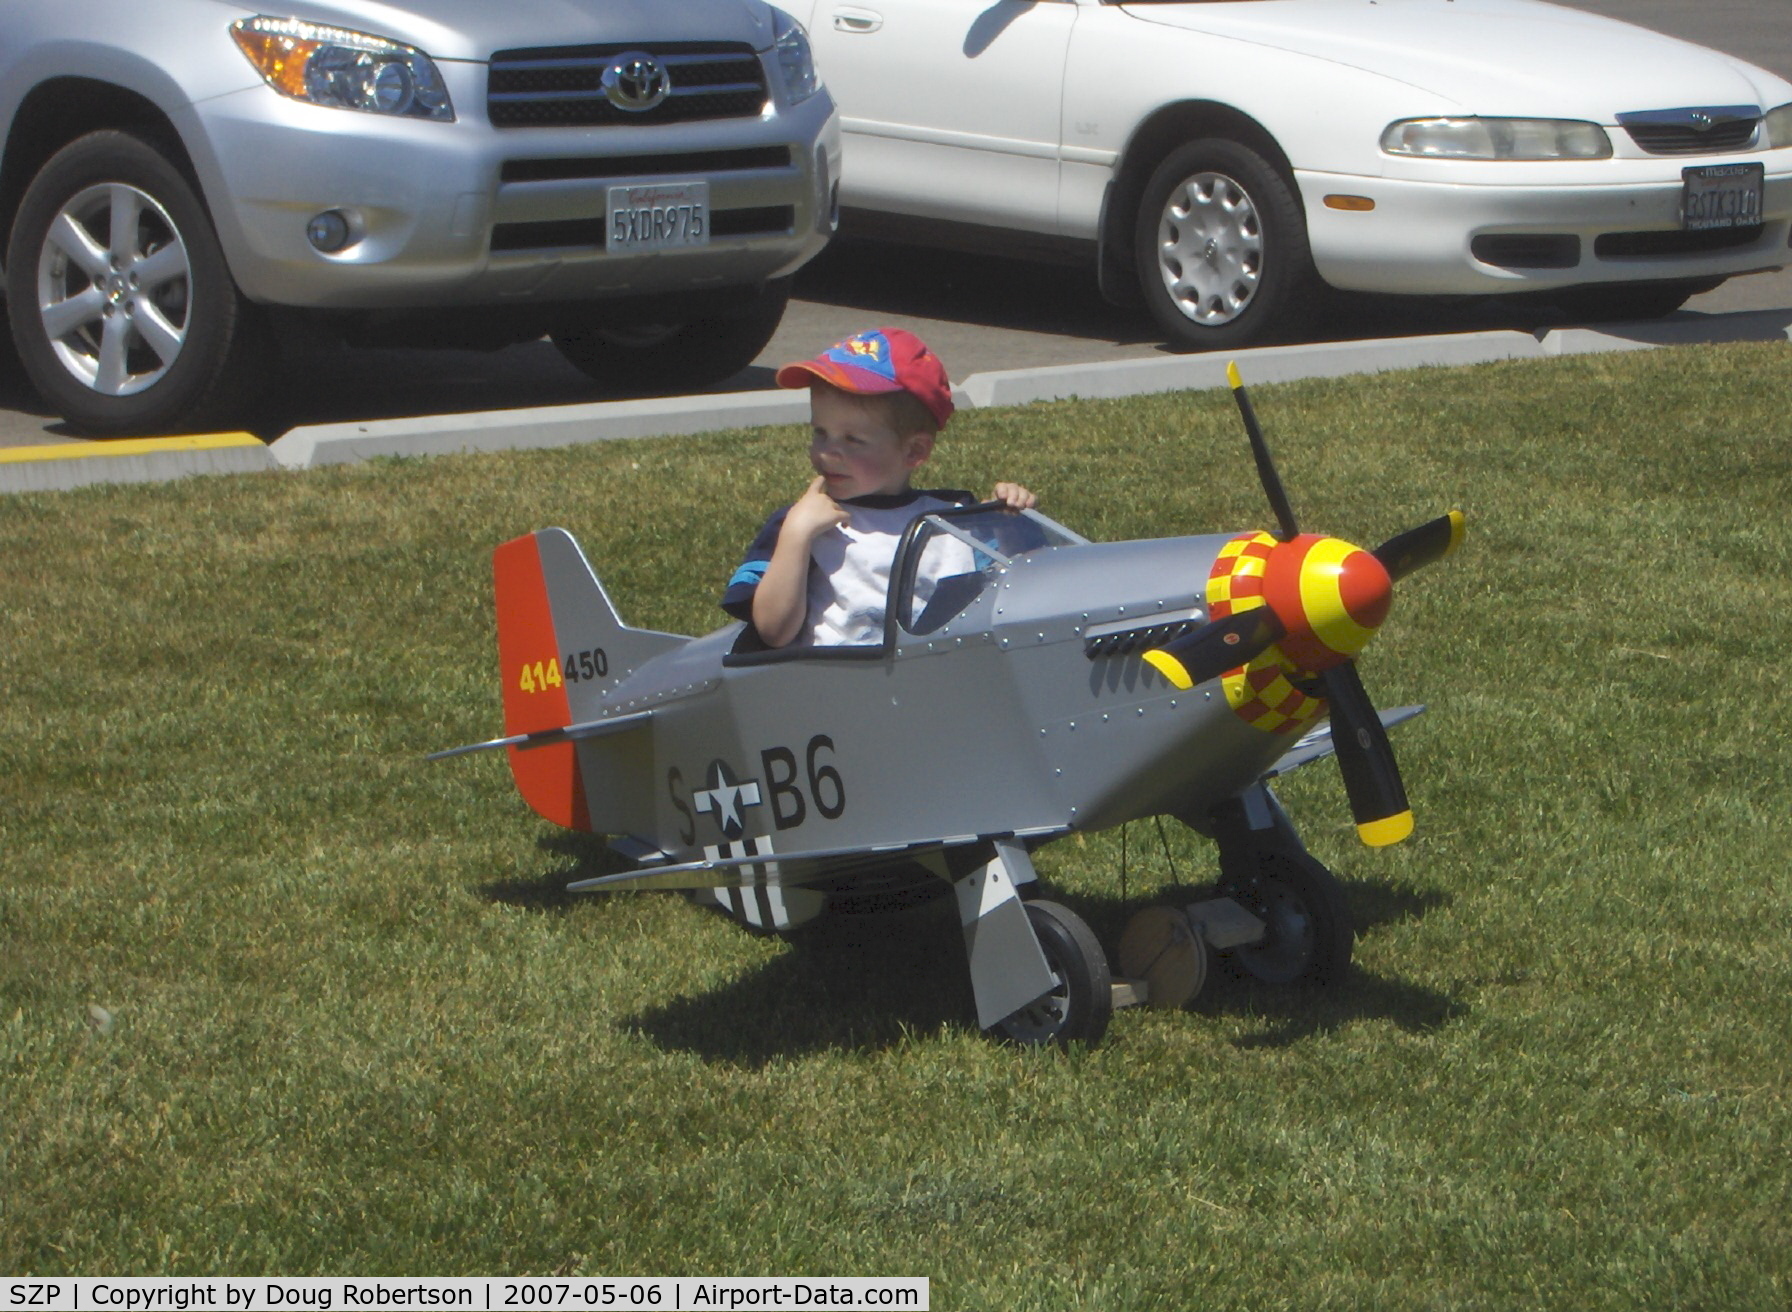 Santa Paula Airport (SZP) - P-51 MUSTANG Pedal Plane-3-4 year old power, tough taxi on deep grass runway, plans-built by Dad